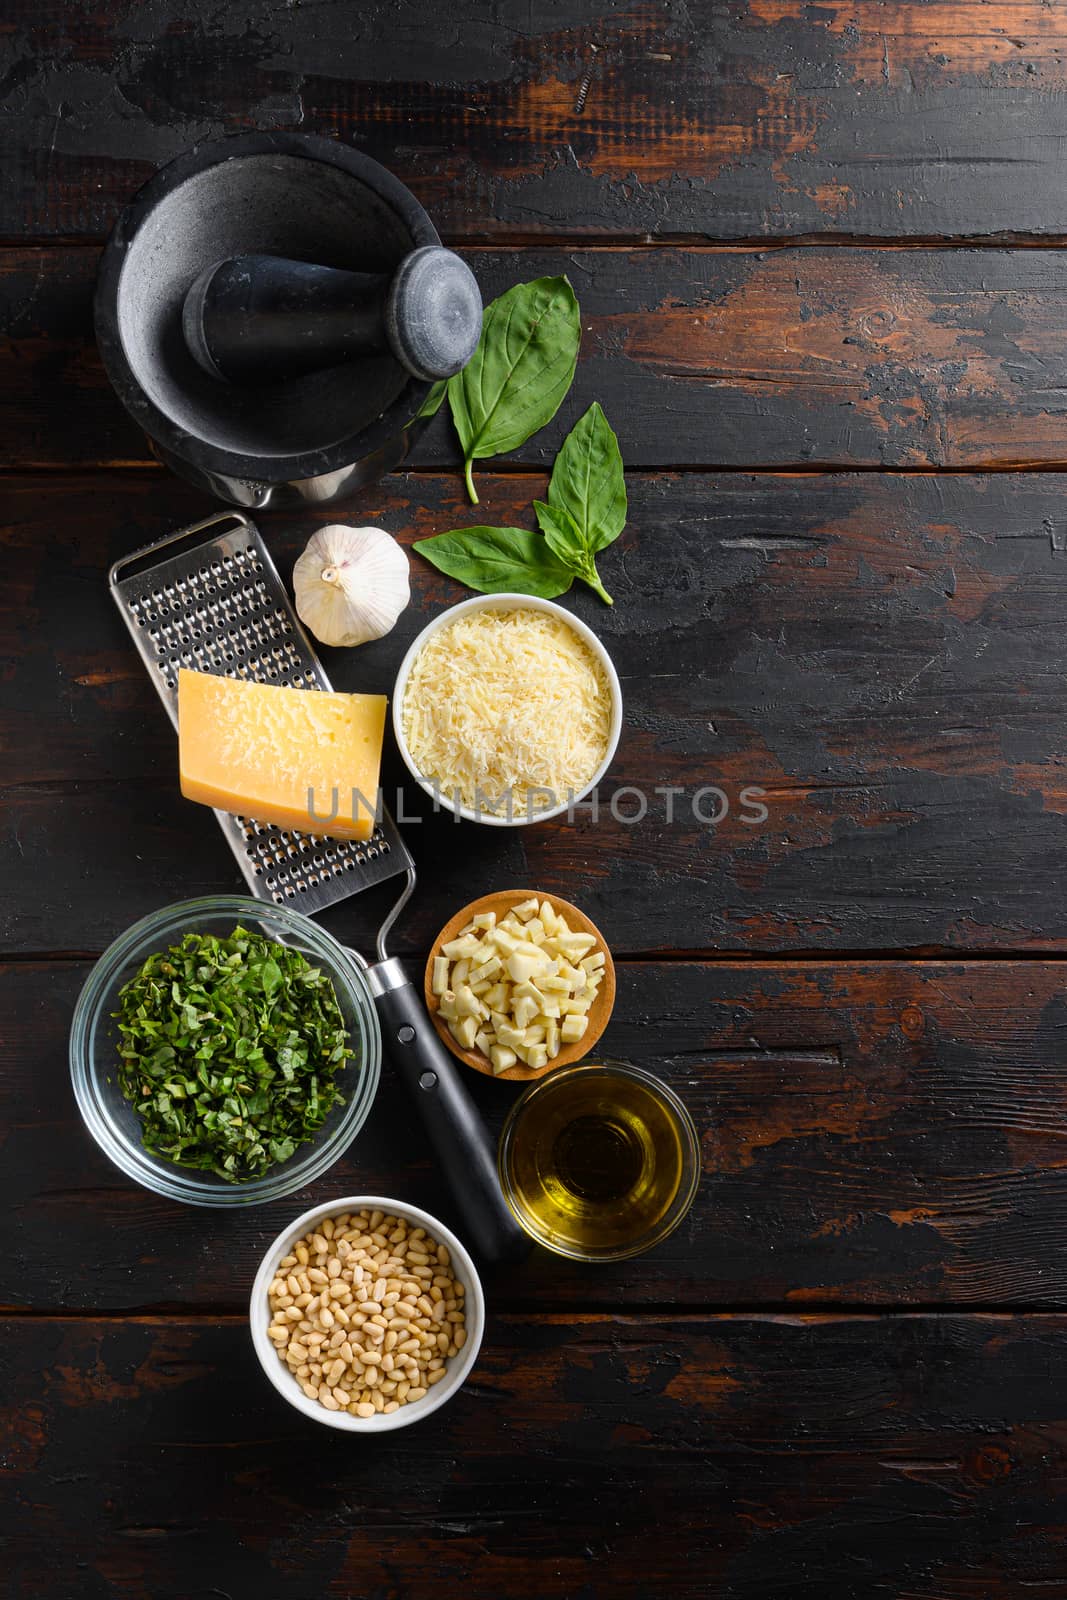 Fresh ingredients for pesto genovese Italian food cooking ingredients on dark background with rustic wooden chopping board, top view, vertical copy space on side by Ilianesolenyi